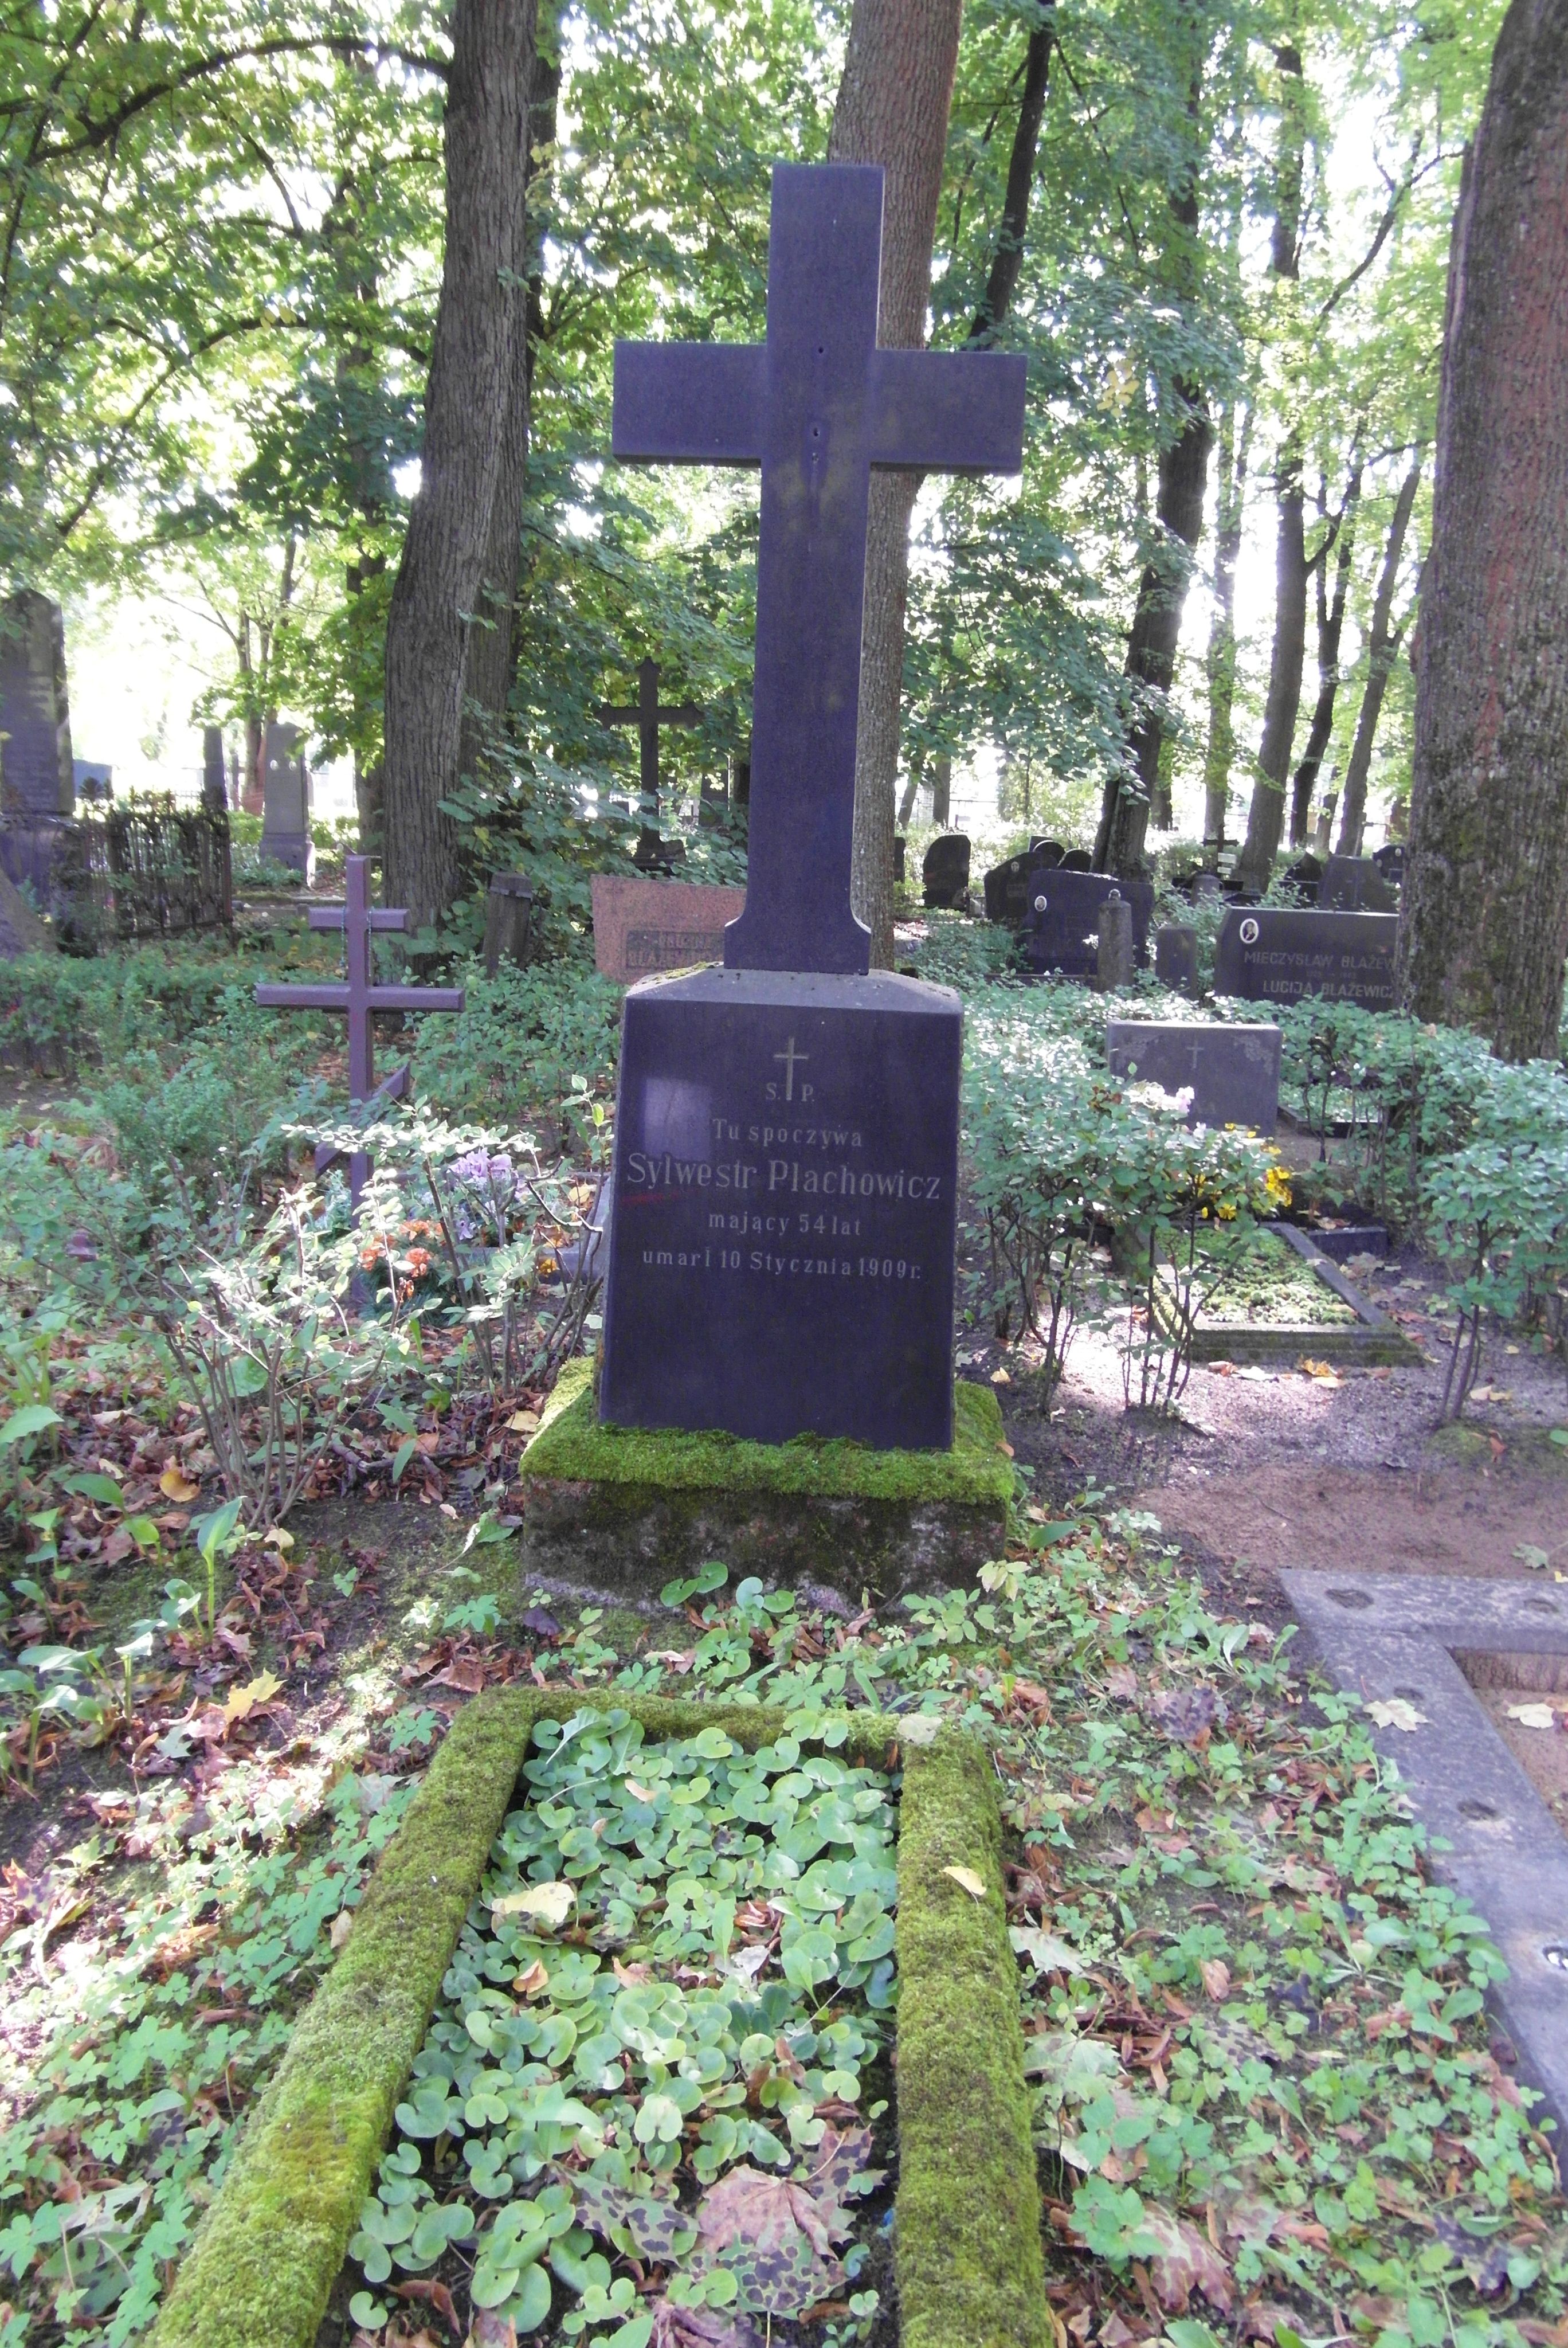 Tombstone of Sylvester Plachowicz, St Michael's cemetery in Riga, as of 2021.